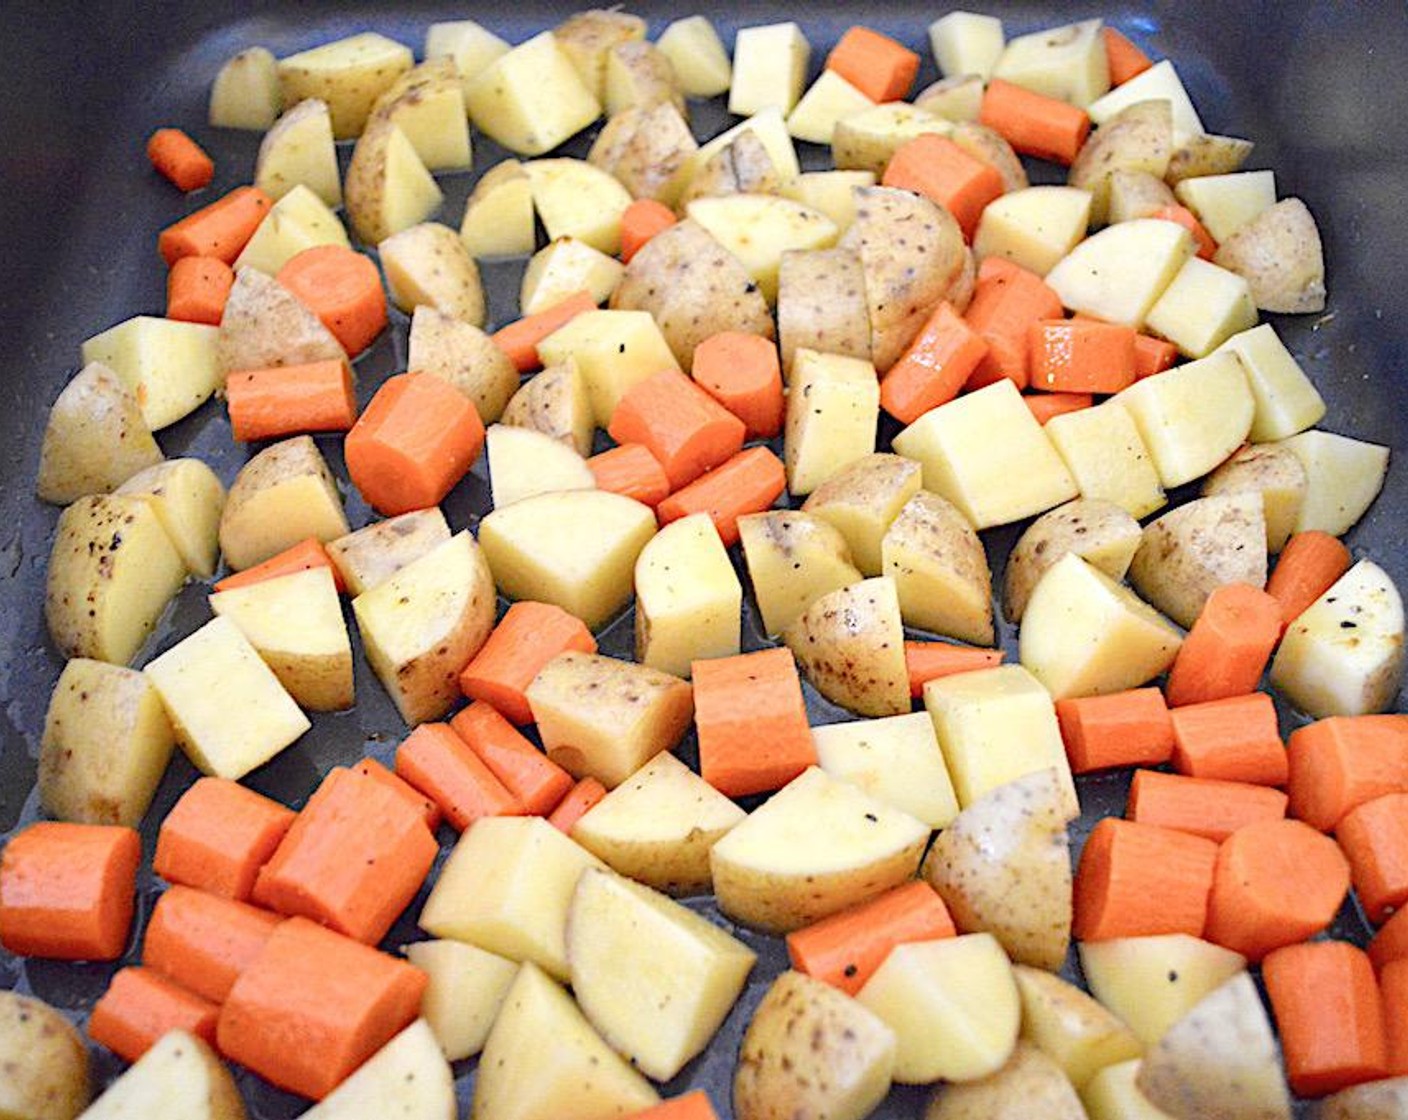 step 2 In a large roasting pan, add the Carrots (7) and Yukon Gold Potatoes (6) into the pan and drizzle them generously with Olive Oil (as needed). Sprinkle them with Salt (to taste), Freshly Ground Black Pepper (to taste), McCormick® Garlic Powder (1 pinch), and Curry Powder (1 pinch). Toss well to coat the vegetables.